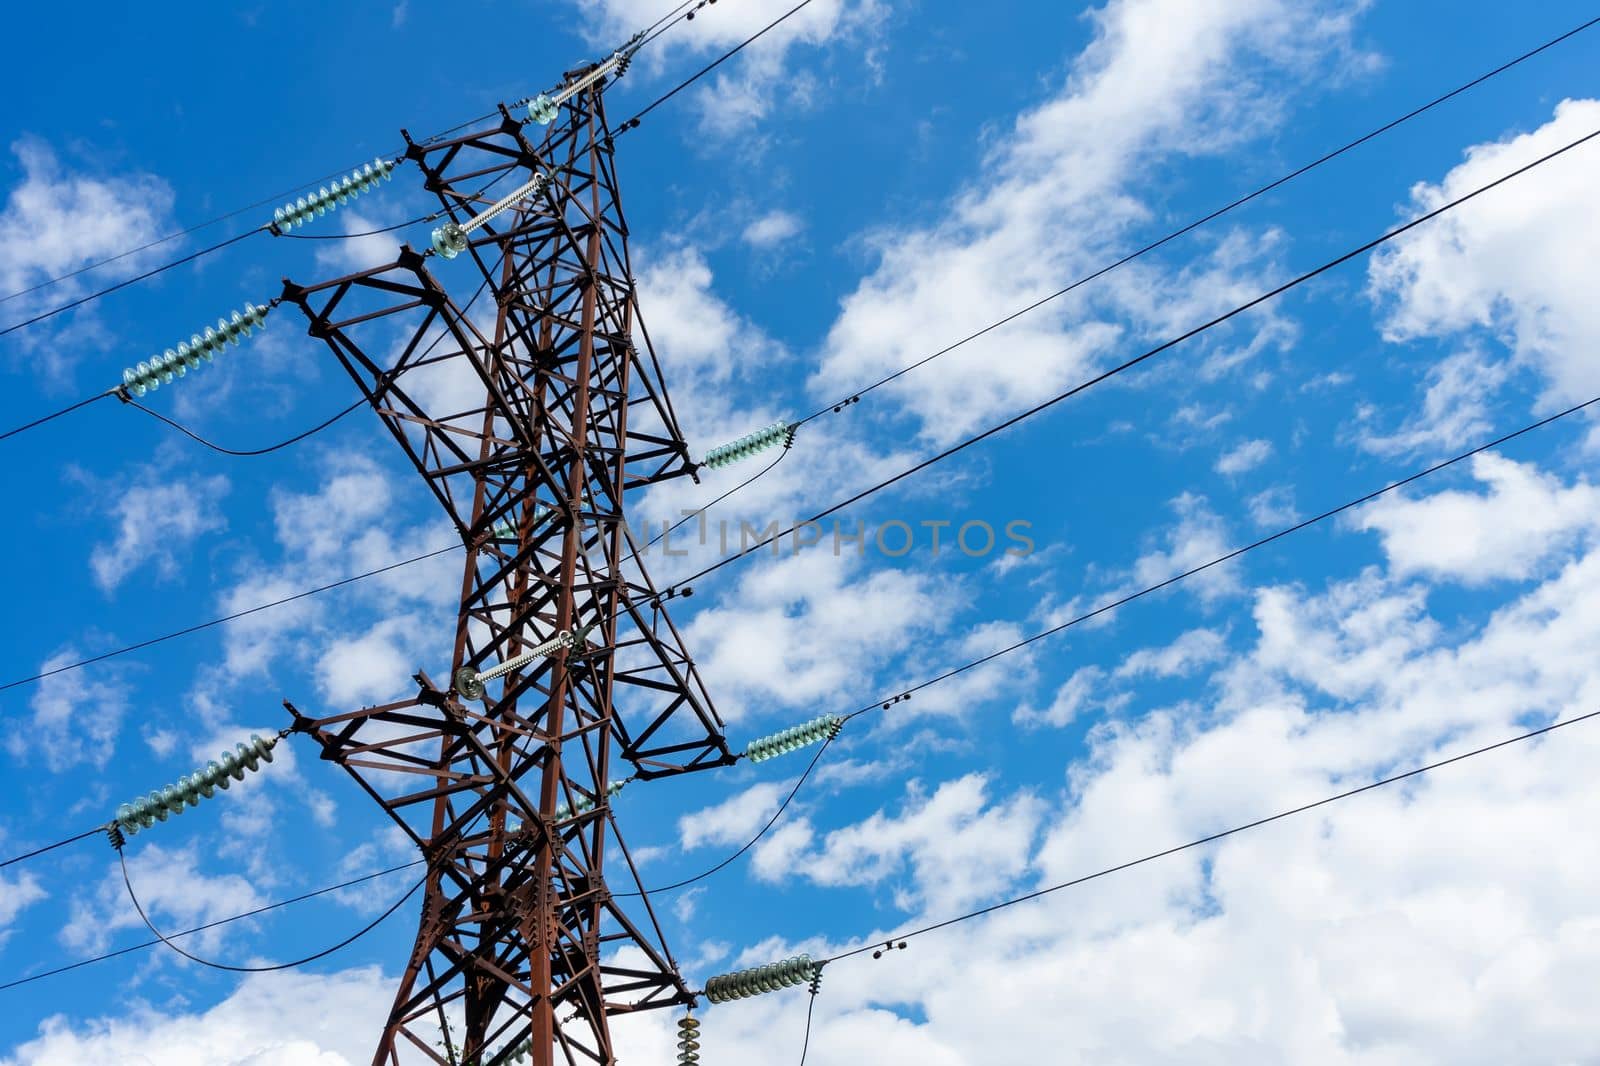 A pole of a high-voltage electric line on the background of a blue sky with white clouds